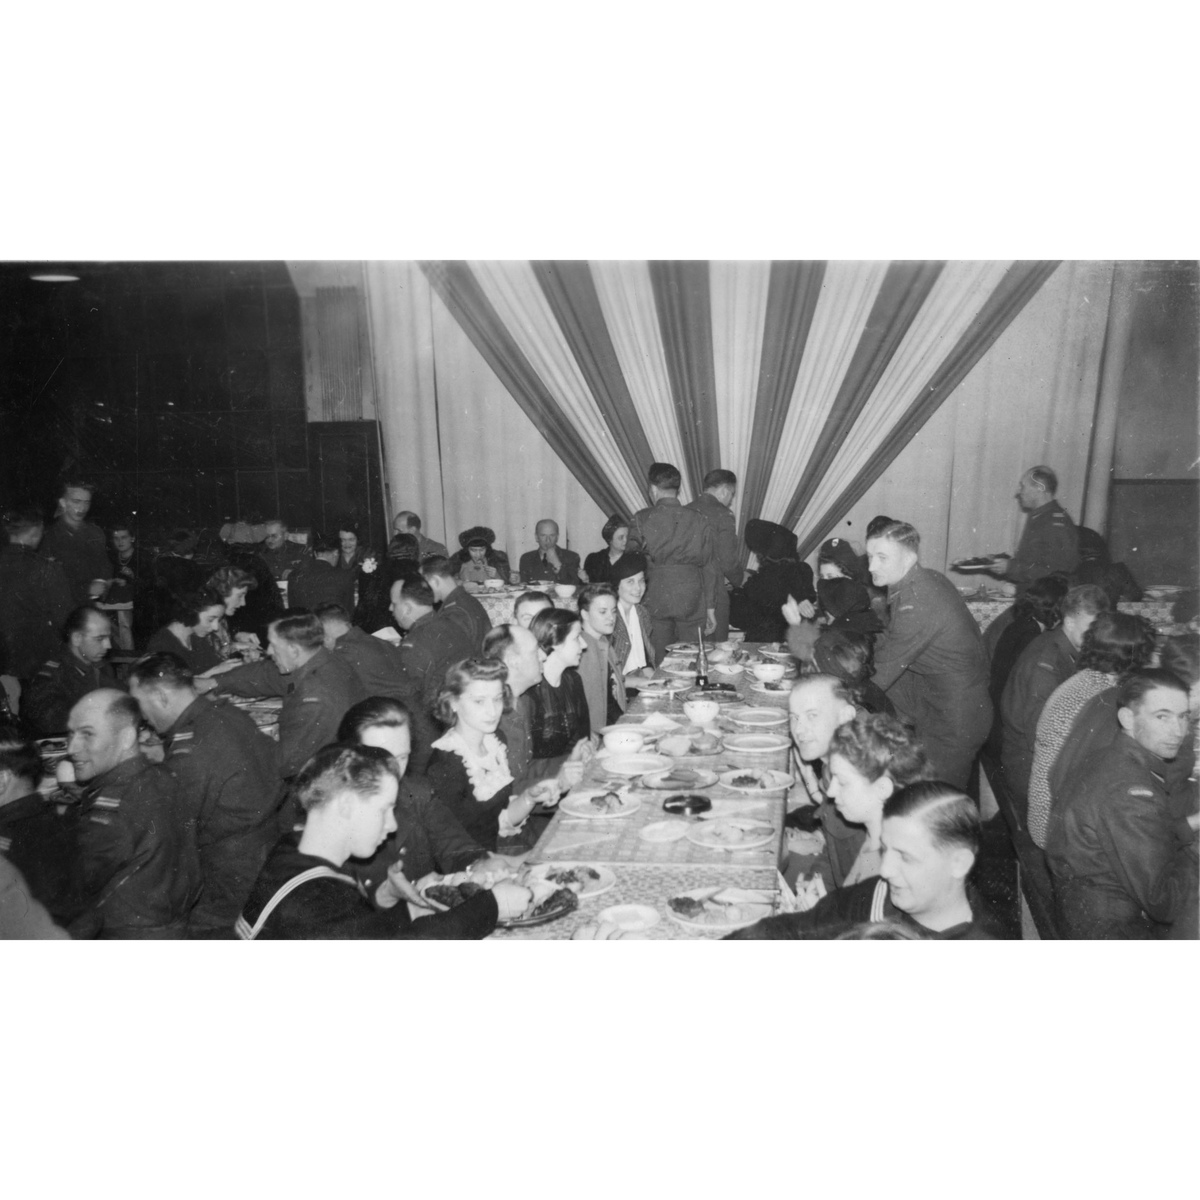 Visiting the Polish Army at Windsor, Canada - Supper with Soldiers in Mess Hall 1-25-1942 squared.jpg